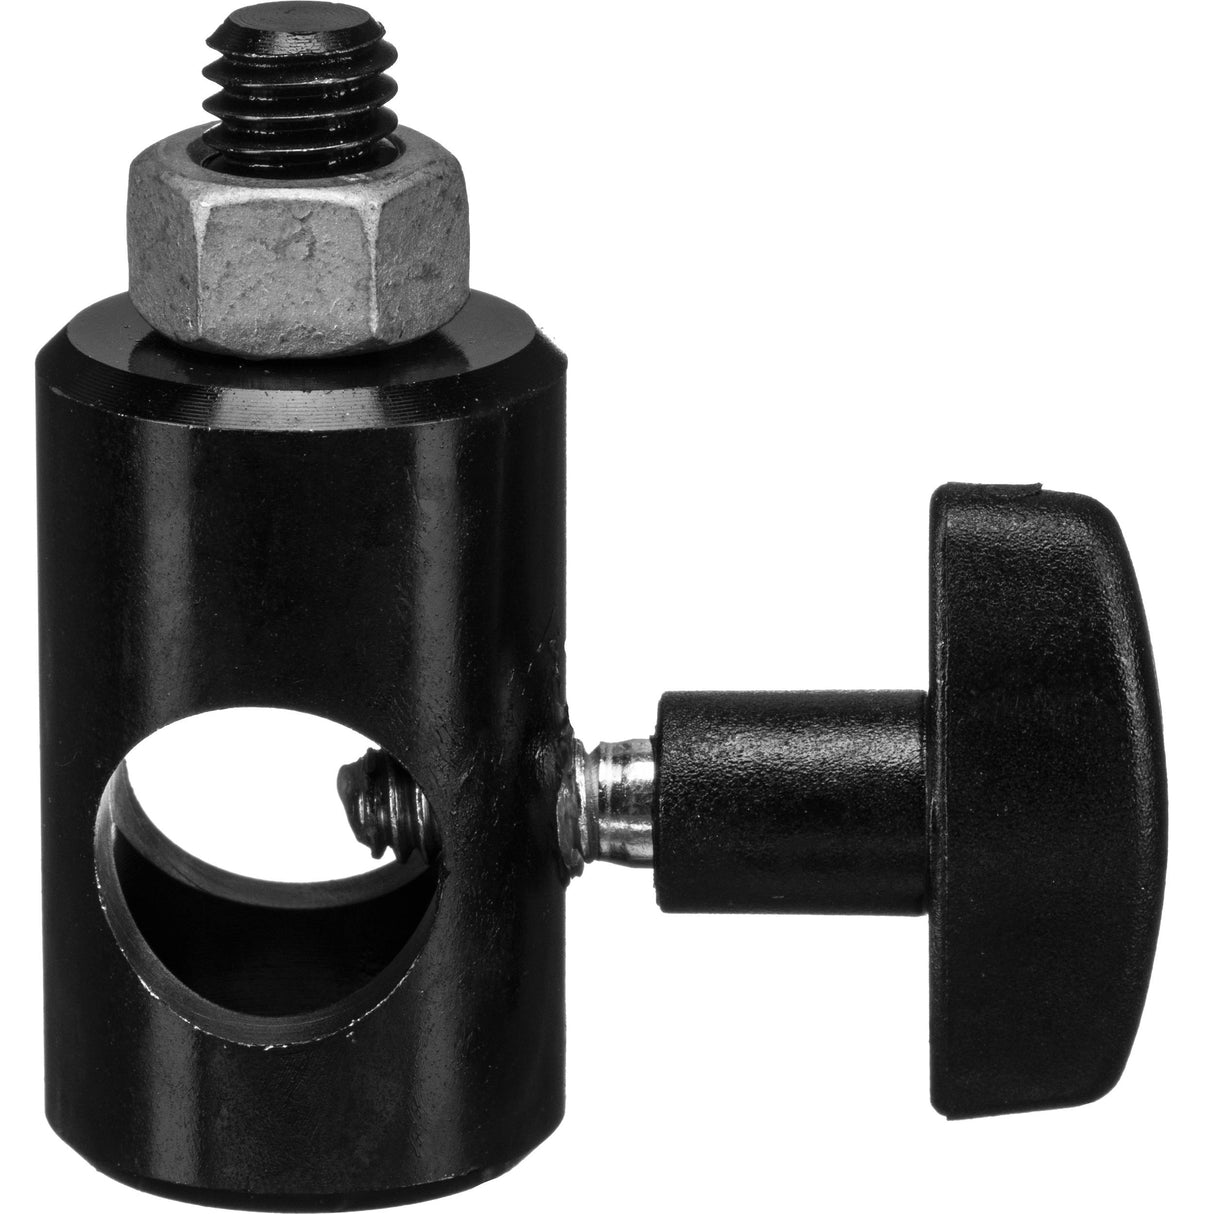 Manfrotto 014-38 Rapid Adapter - 5/8" Stud to 3/8" Thread